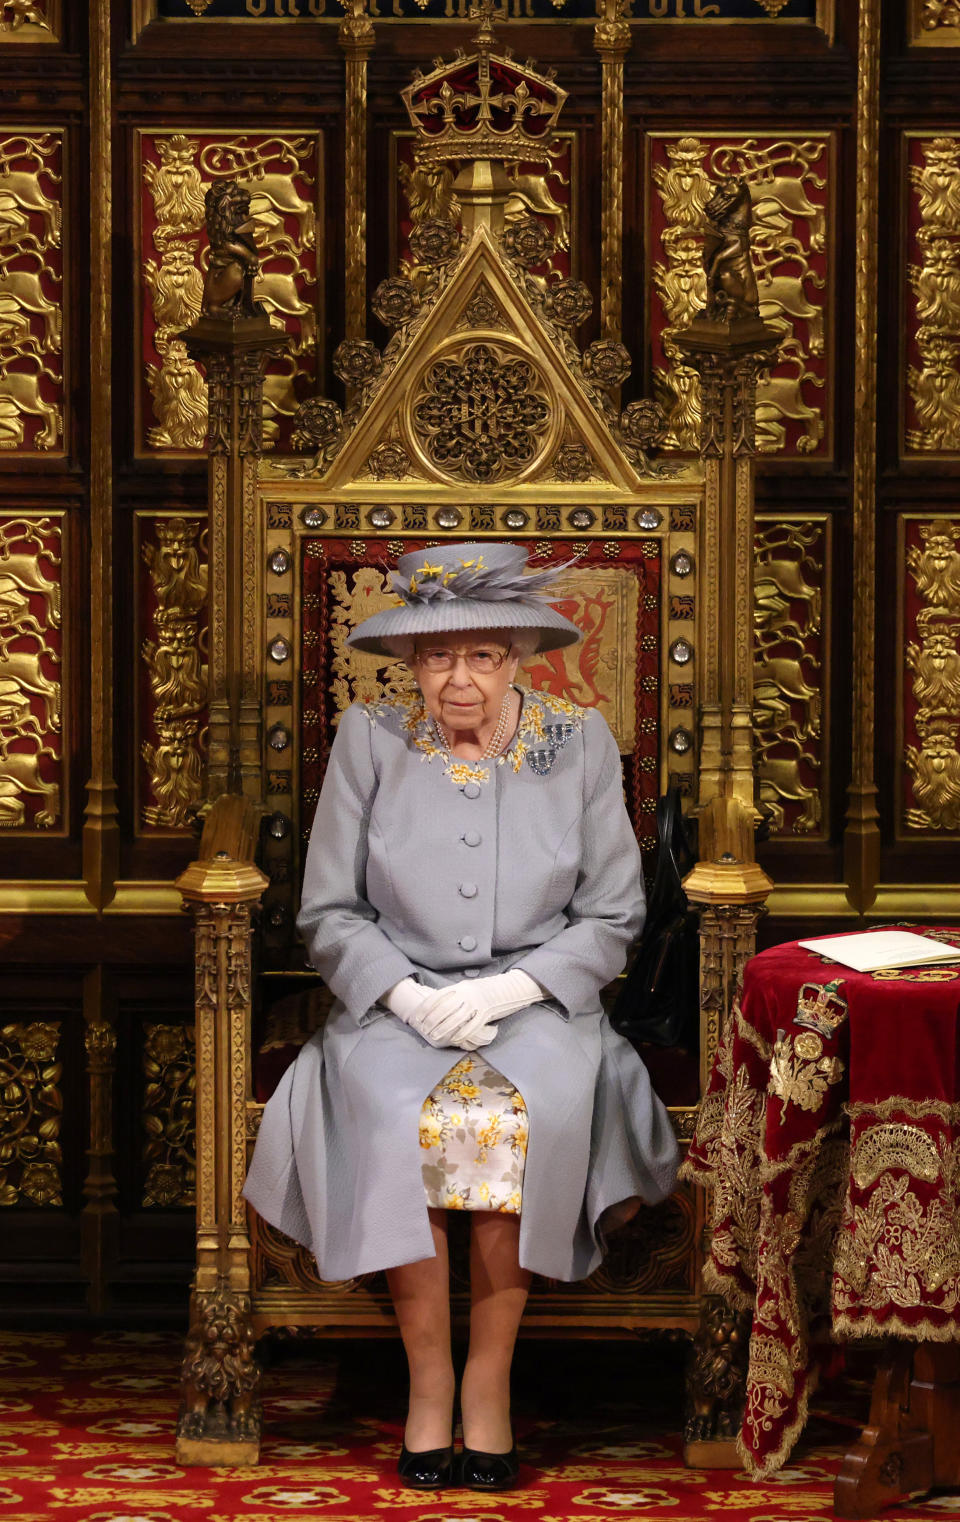 LONDON, ENGLAND - MAY 11:  Queen Elizabeth II ahead of the Queen's Speech in the House of Lord's Chamber during the State Opening of Parliament at the House of Lords on May 11, 2021 in London, England. (Photo by Chris Jackson - WPA Pool/Getty Images)